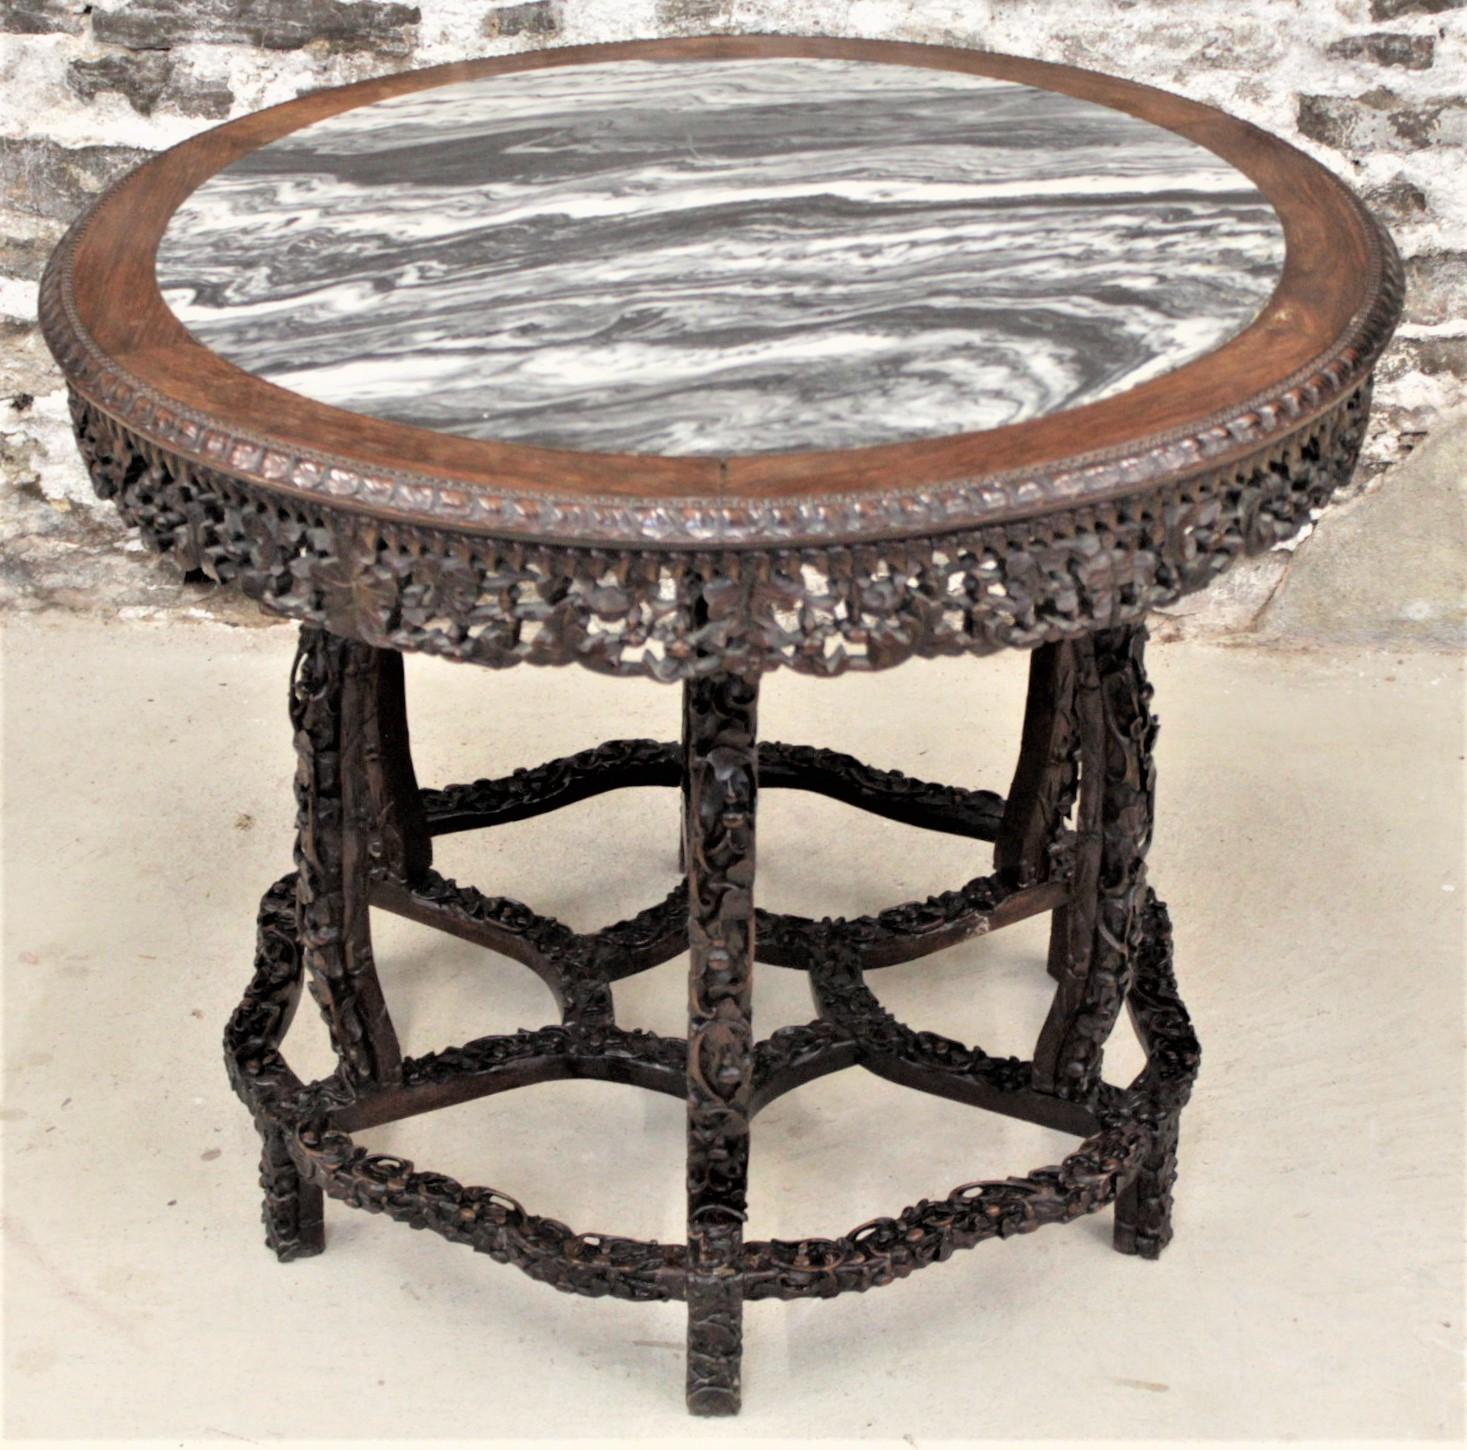 This antique hand-carved hardwood center table is unsigned, but presumed to have originated in China in approximately 1900 in the period Chinese Export style. The table has a round top with an inset piece of polished dream stone. The top has